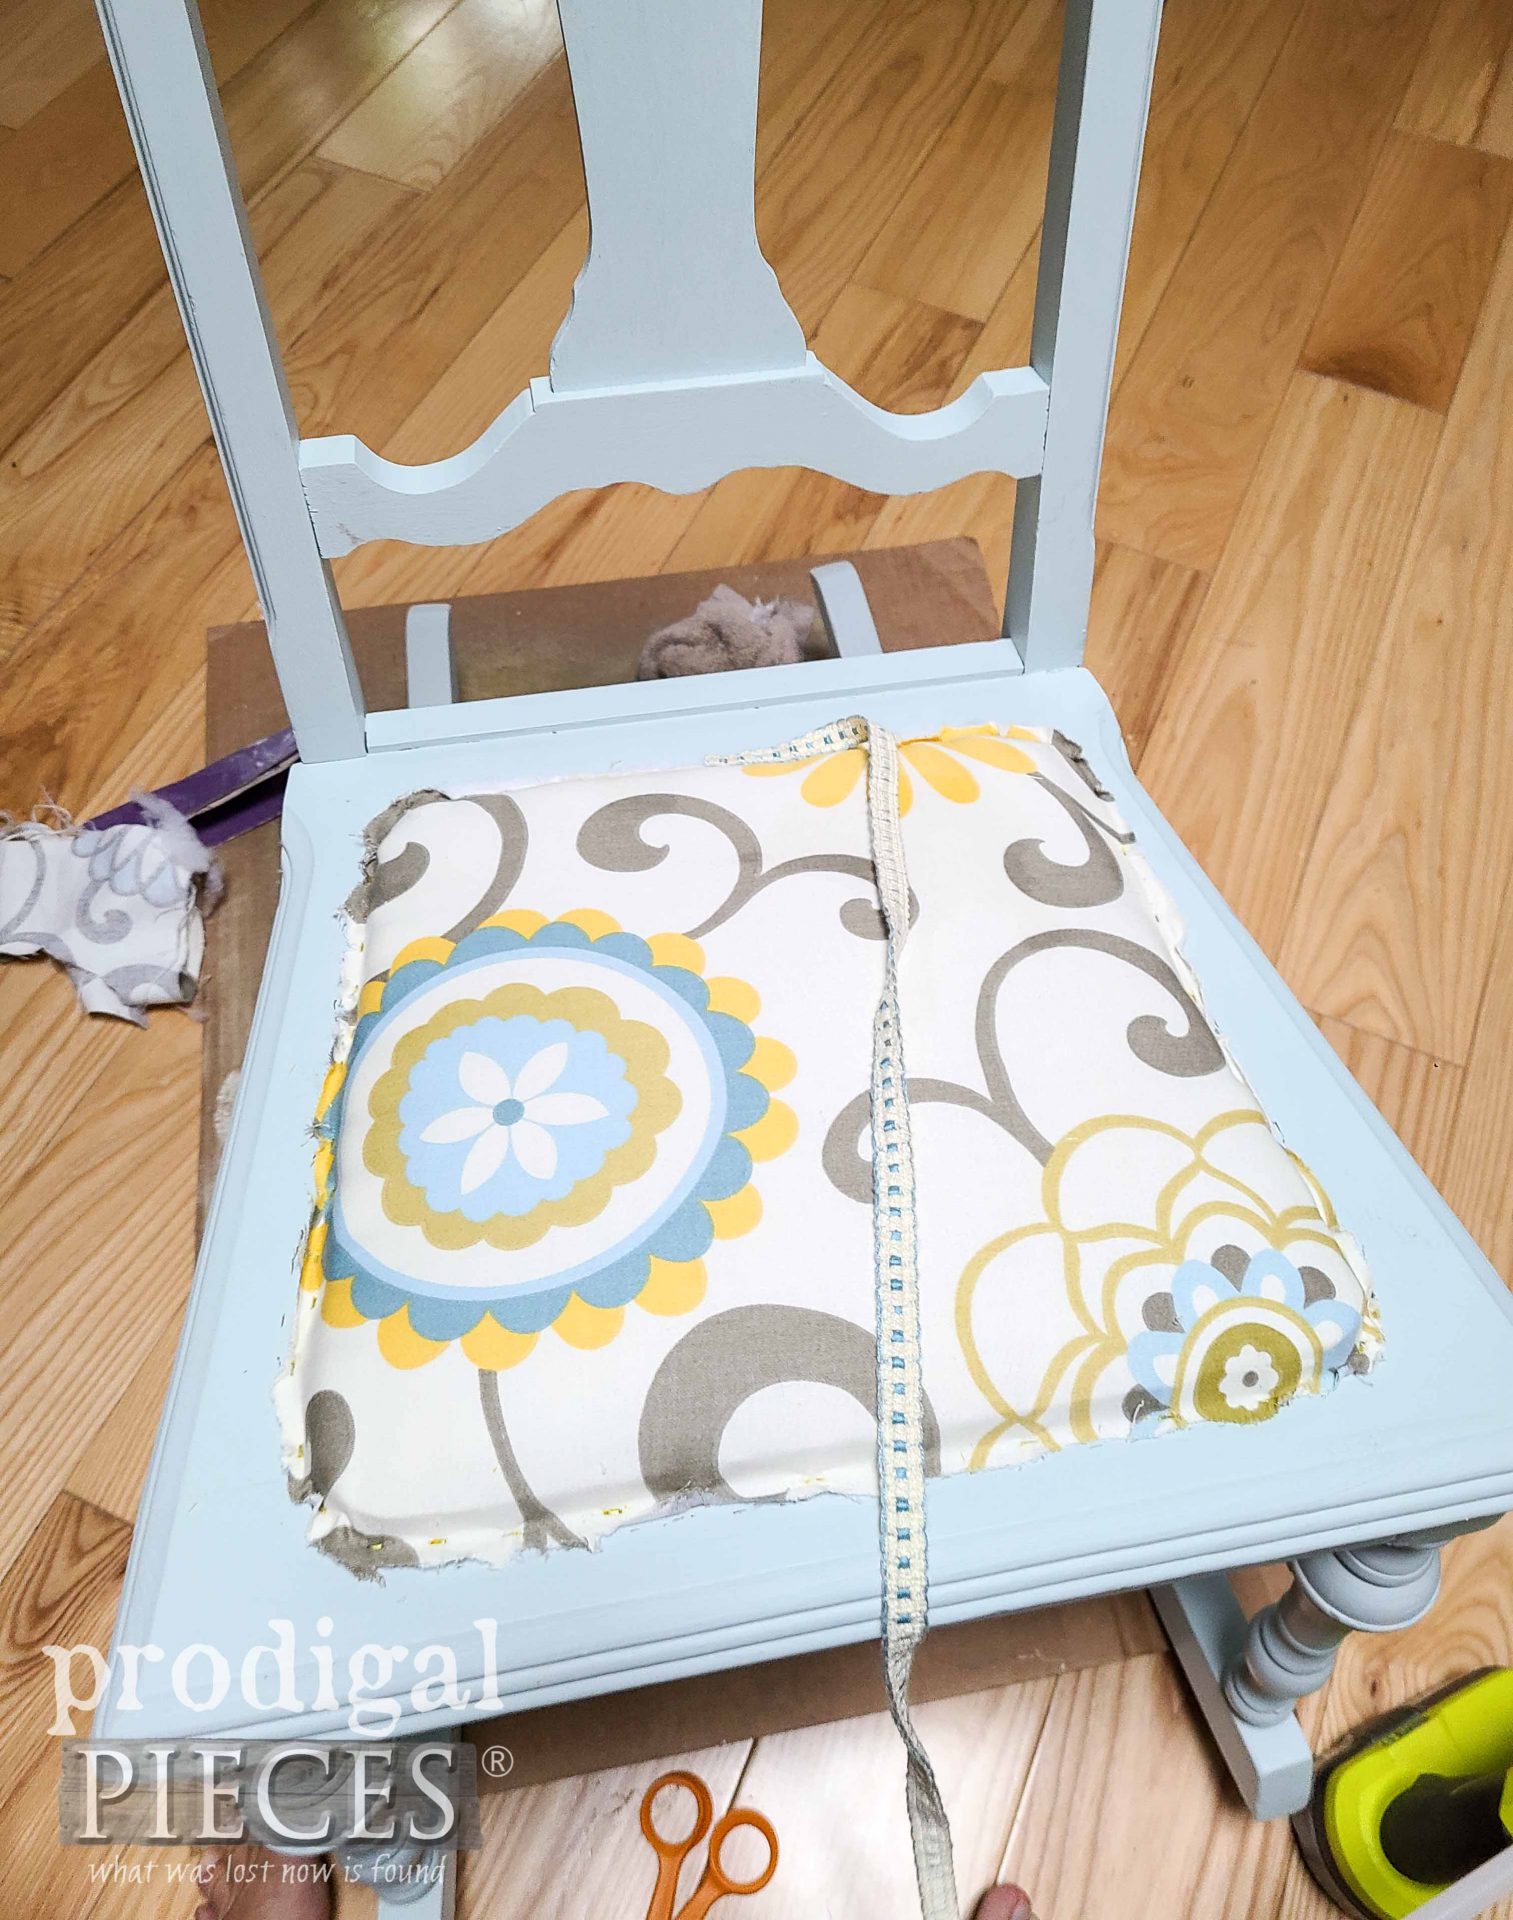 Antique Sewing Rocking Chair Upholstery | prodigalpieces.com #prodigalpieces